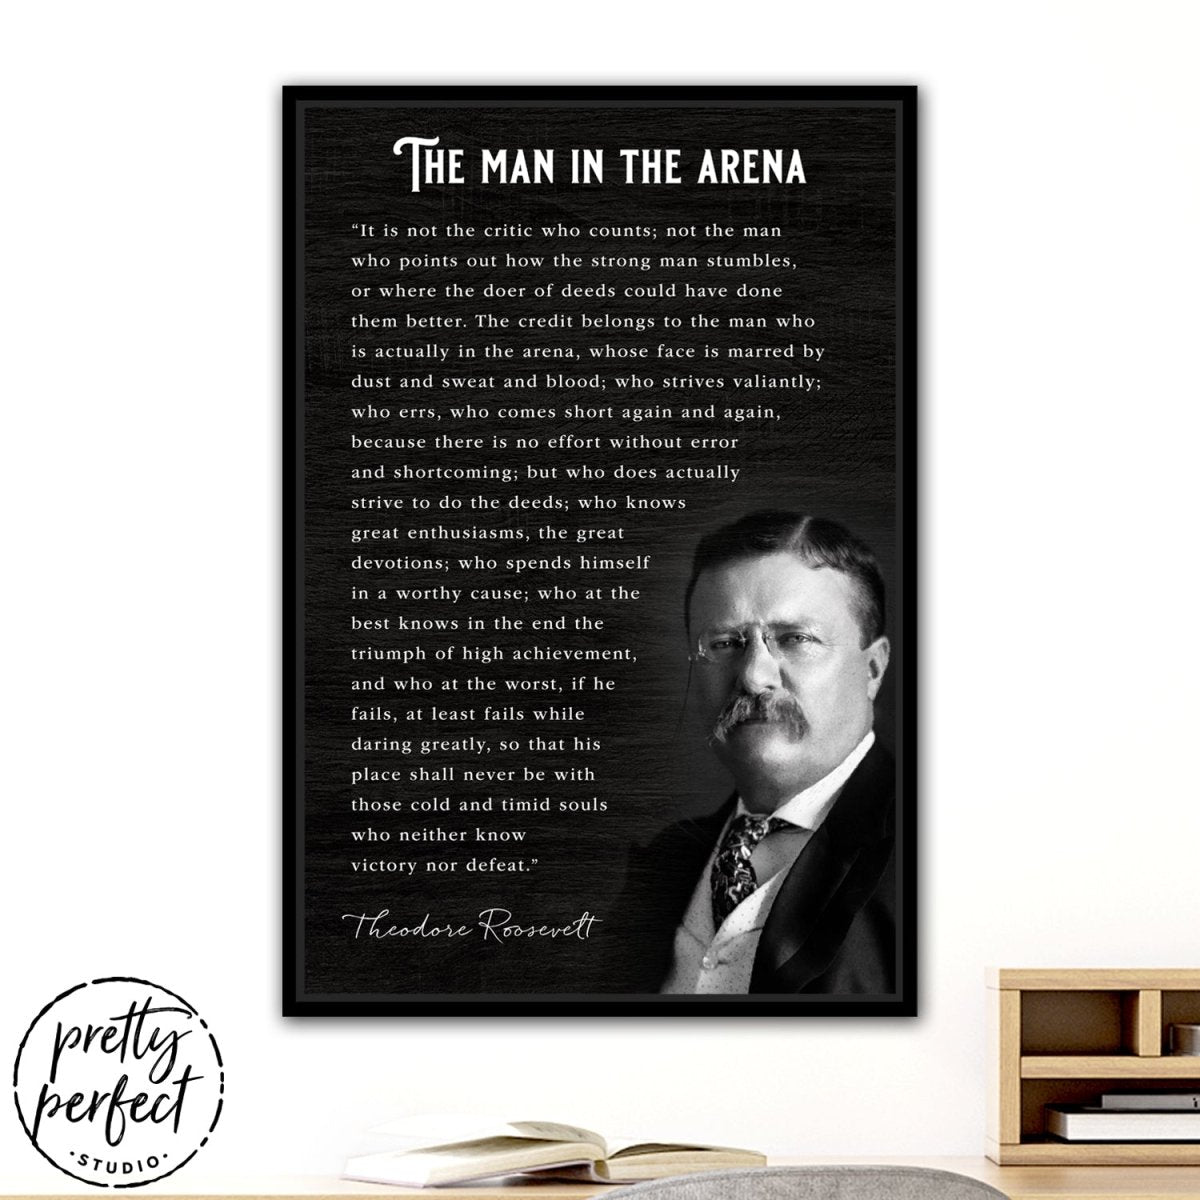 The Man In The Arena Canvas Wall Art in Office - Pretty Perfect Studio